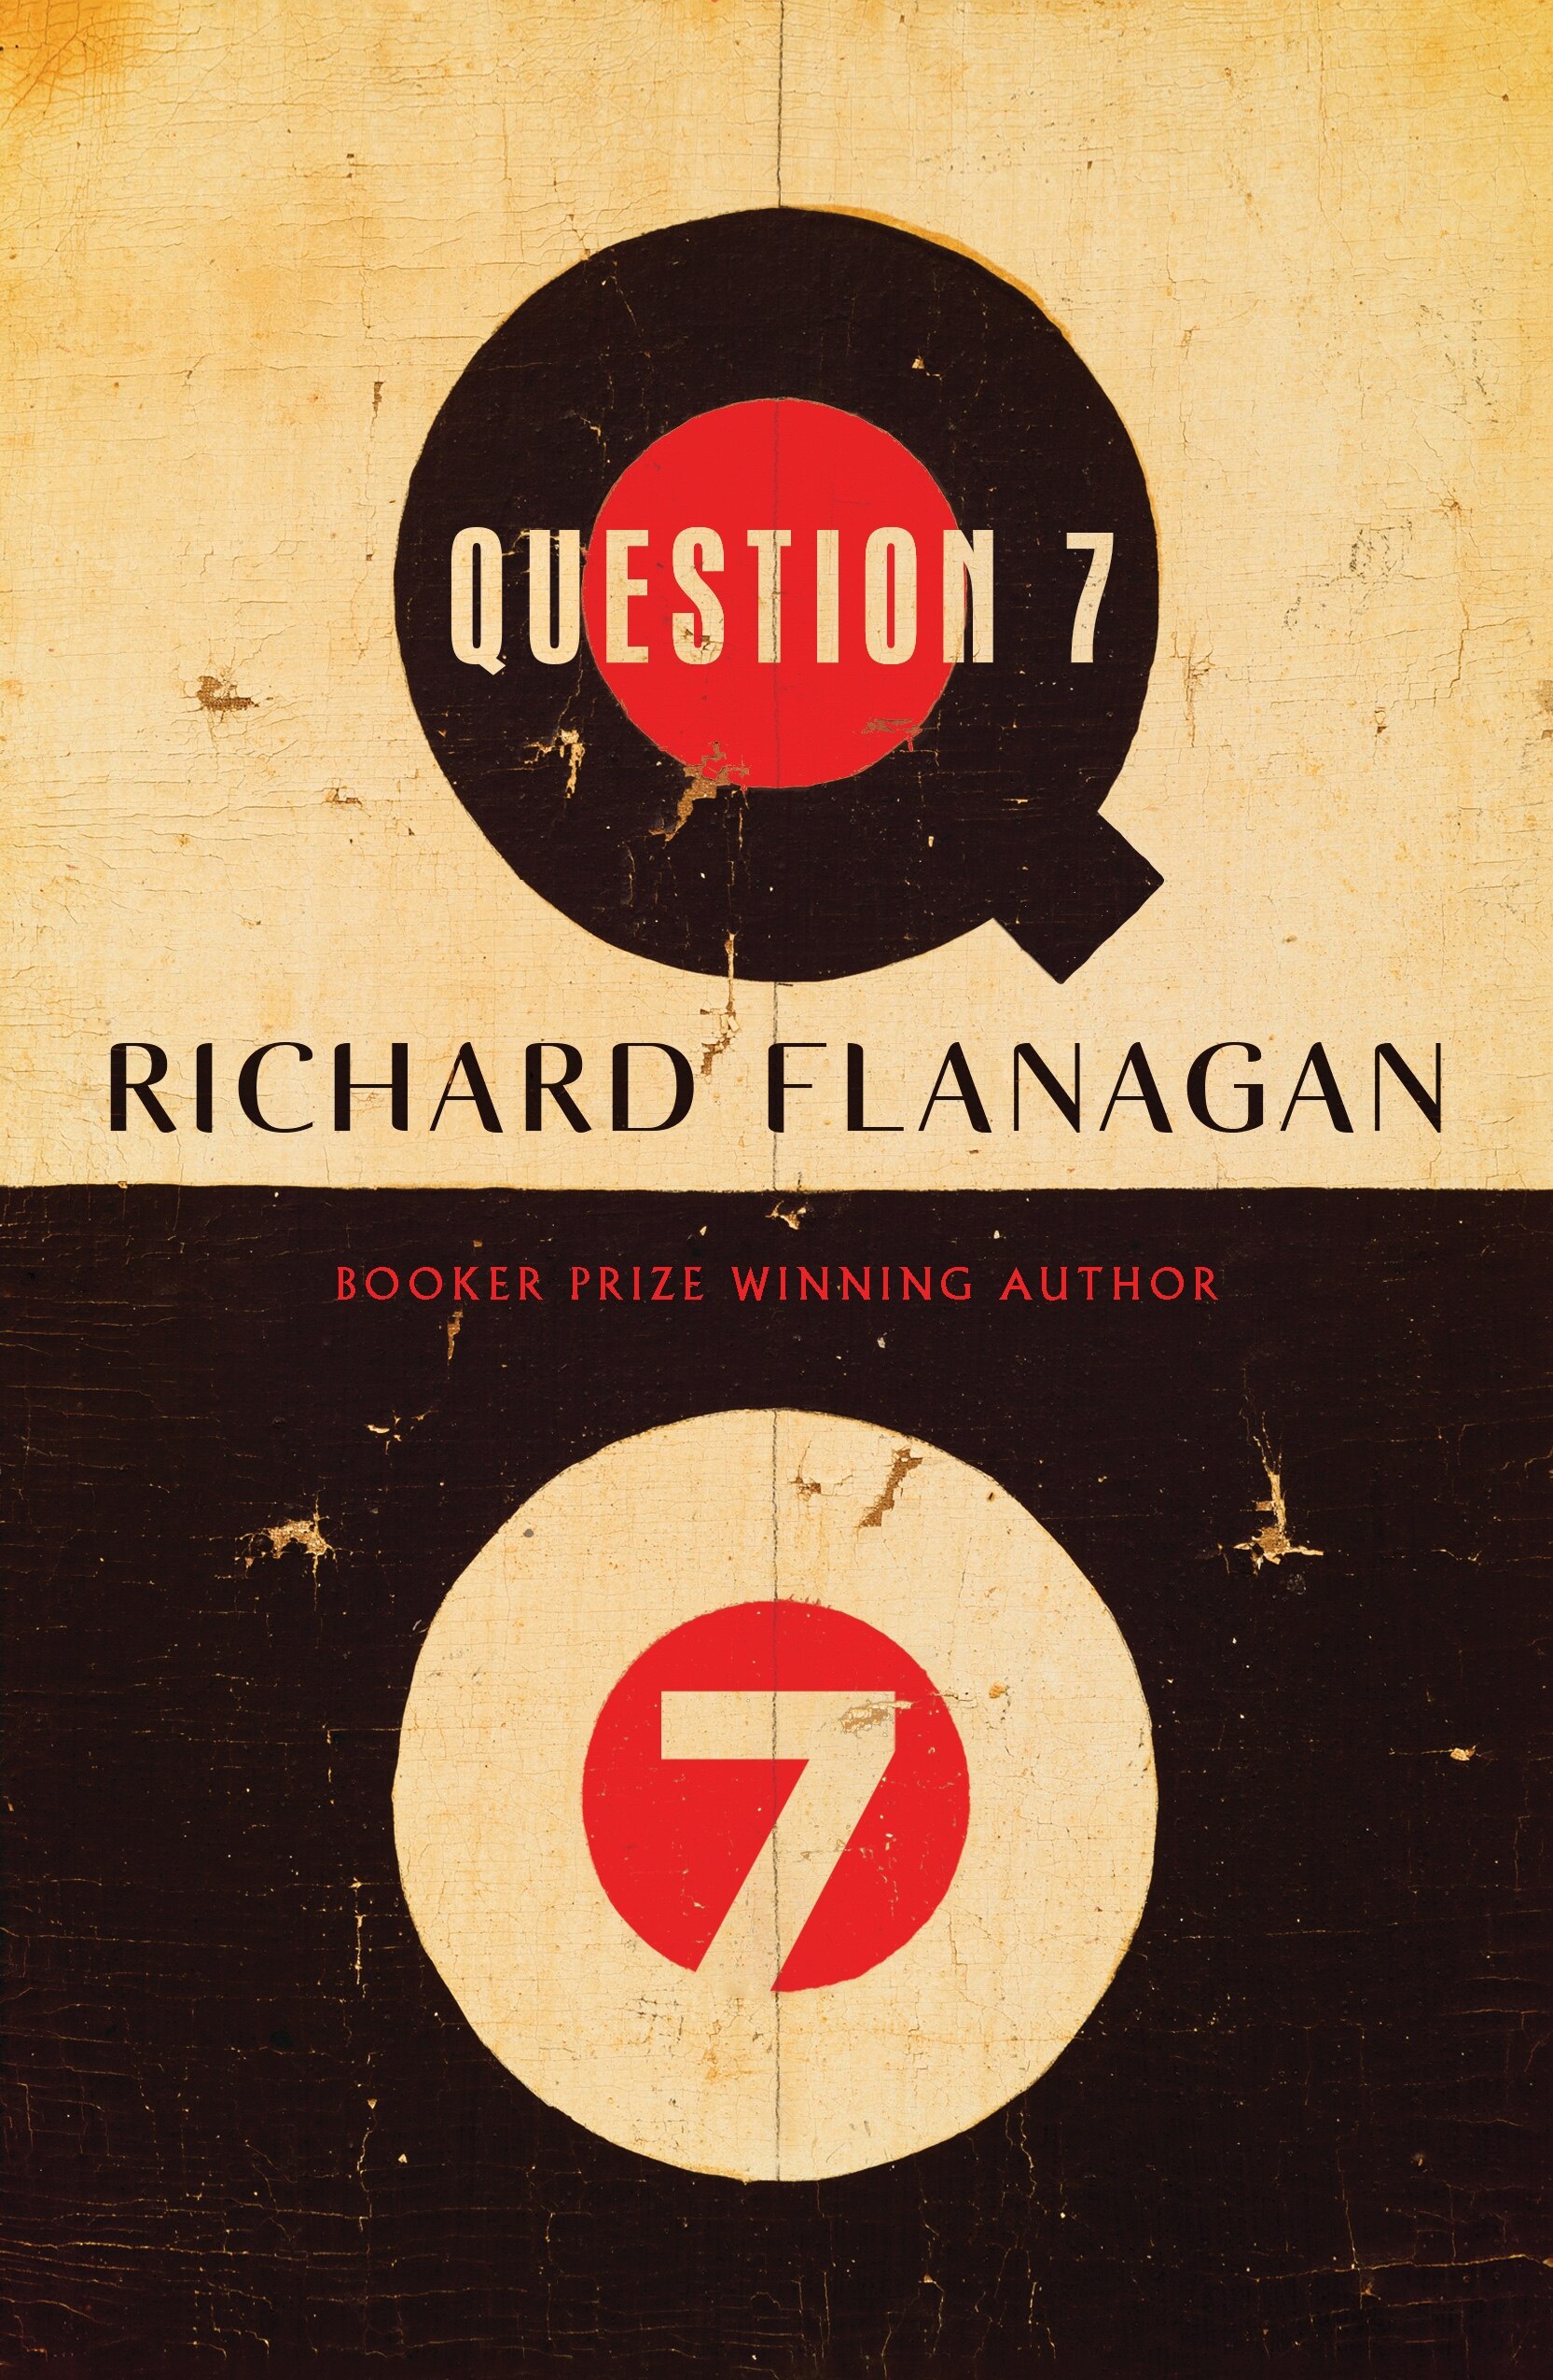 A book cover: the top half features a black Q against a tan background; the lower half, a tan 7 in a circle on black